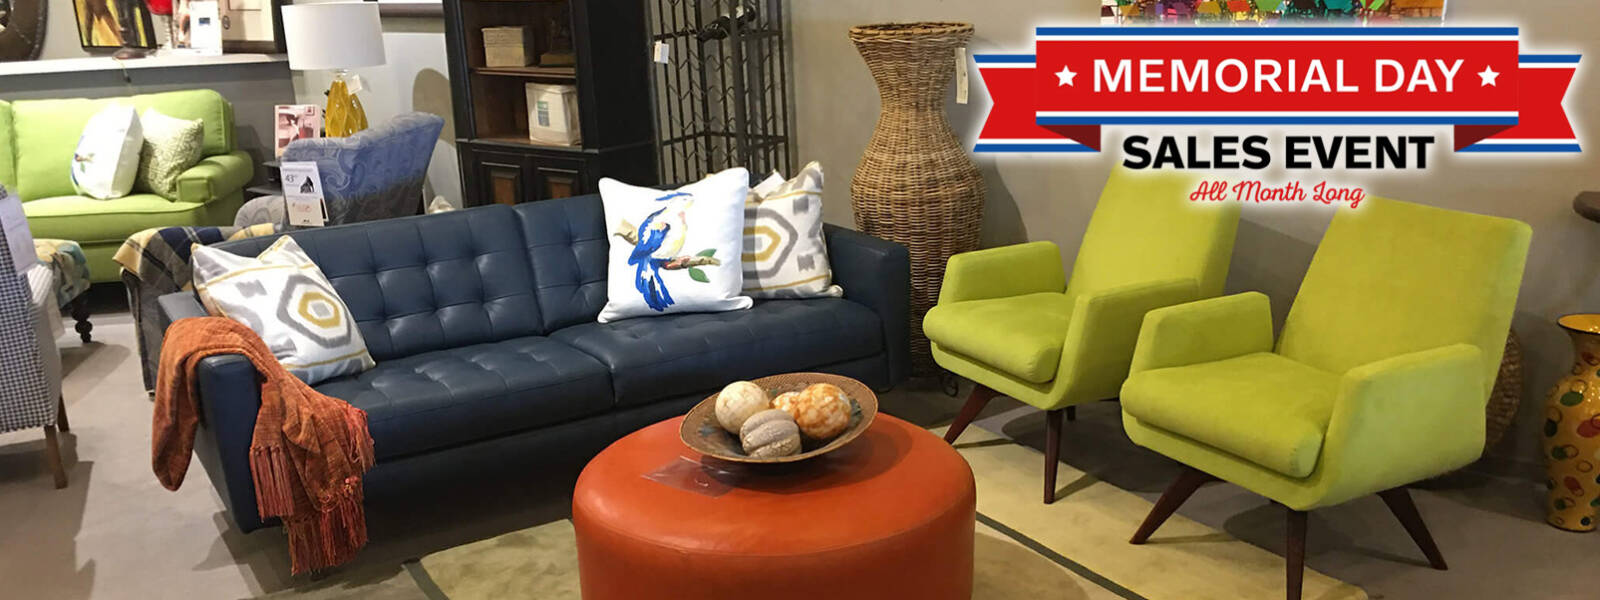 Sofas & Chairs Memorial Day Sales Event - All Month Long